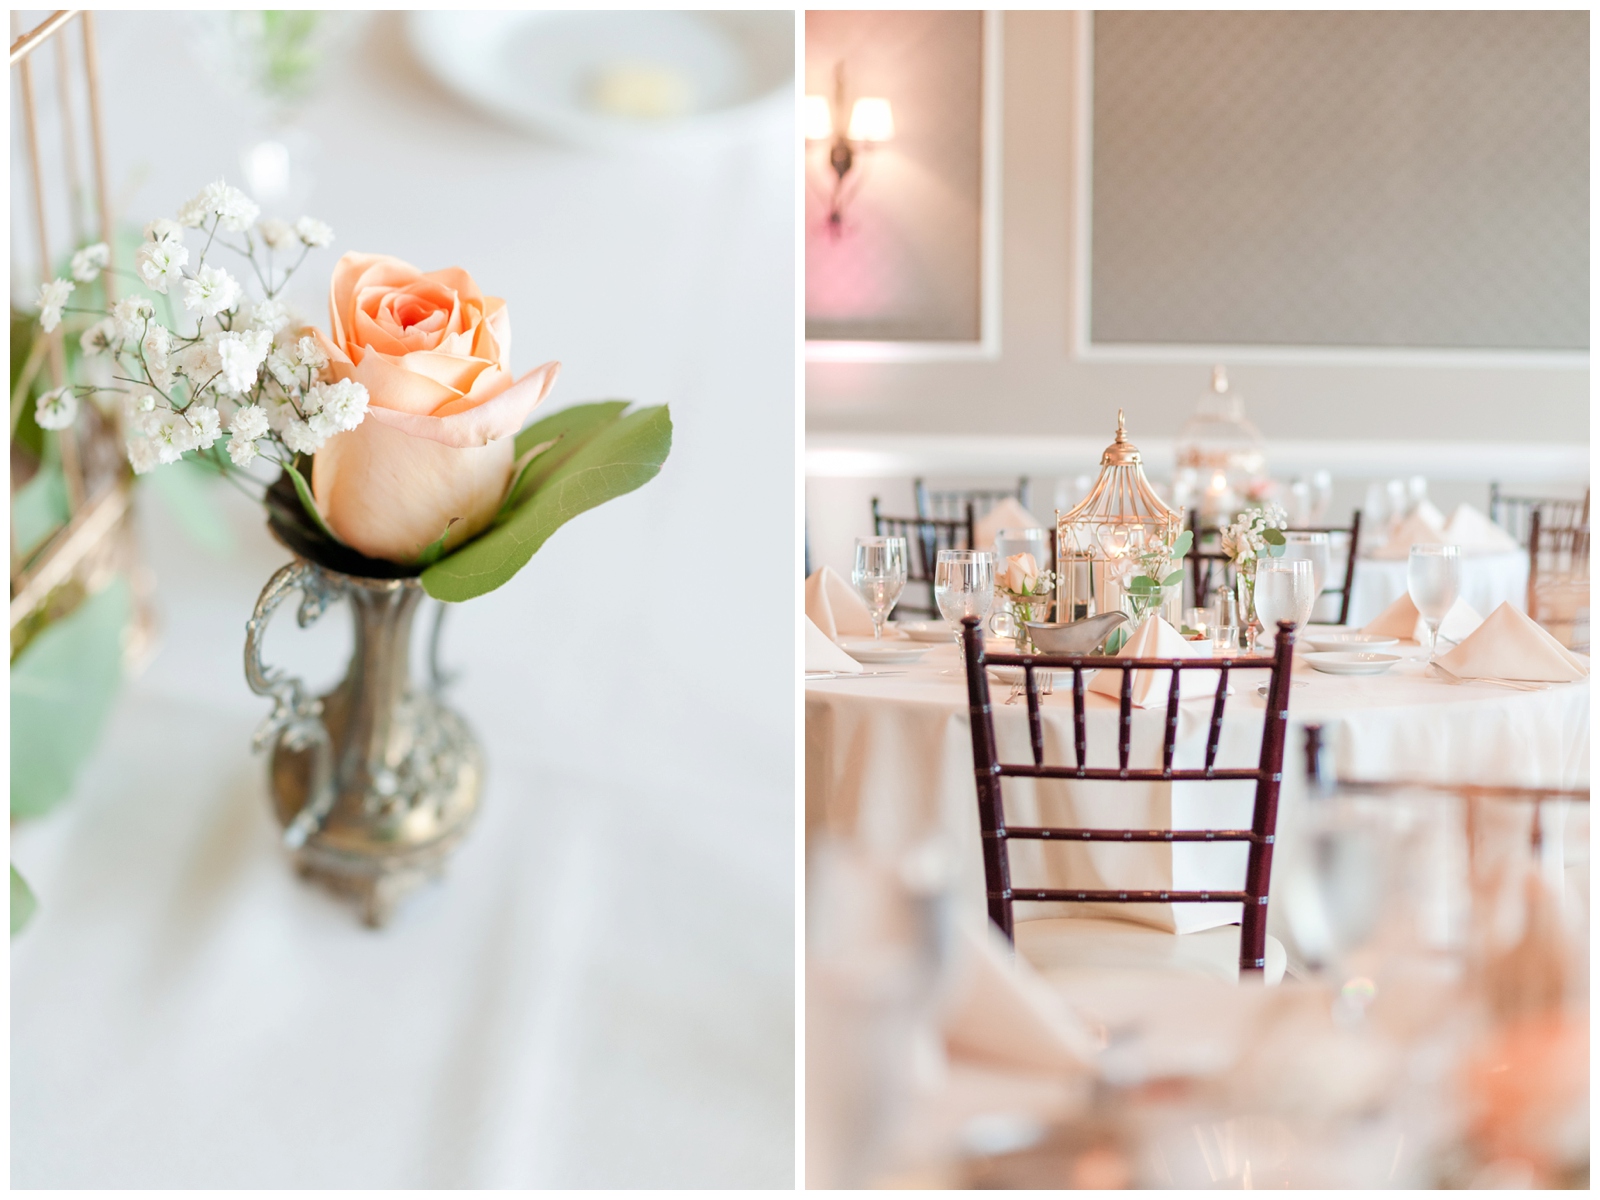 blush and peach roses with Birdcage wedding table decoration at wedgewood golf and country club reception room 